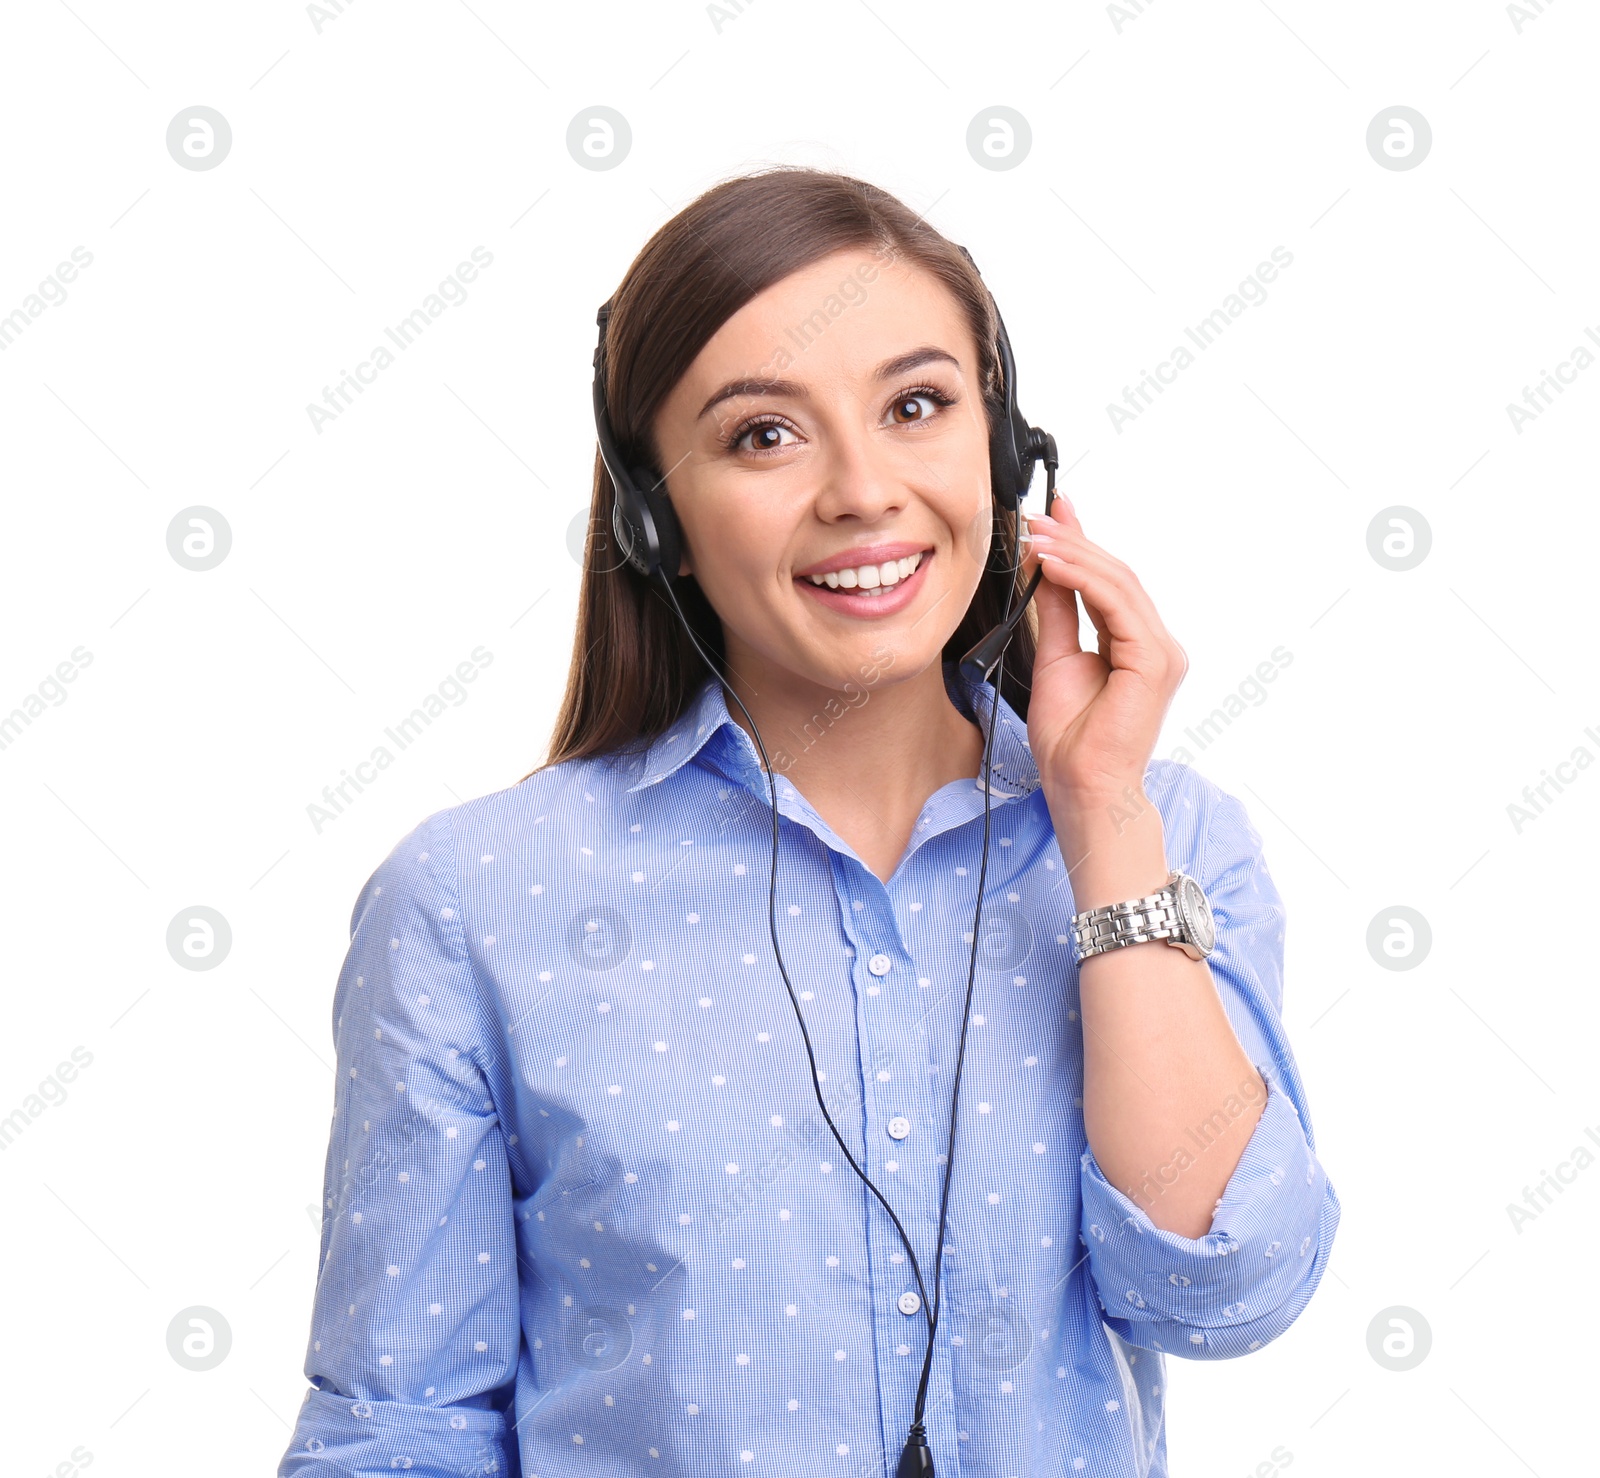 Photo of Young woman talking by phone through headset on white background